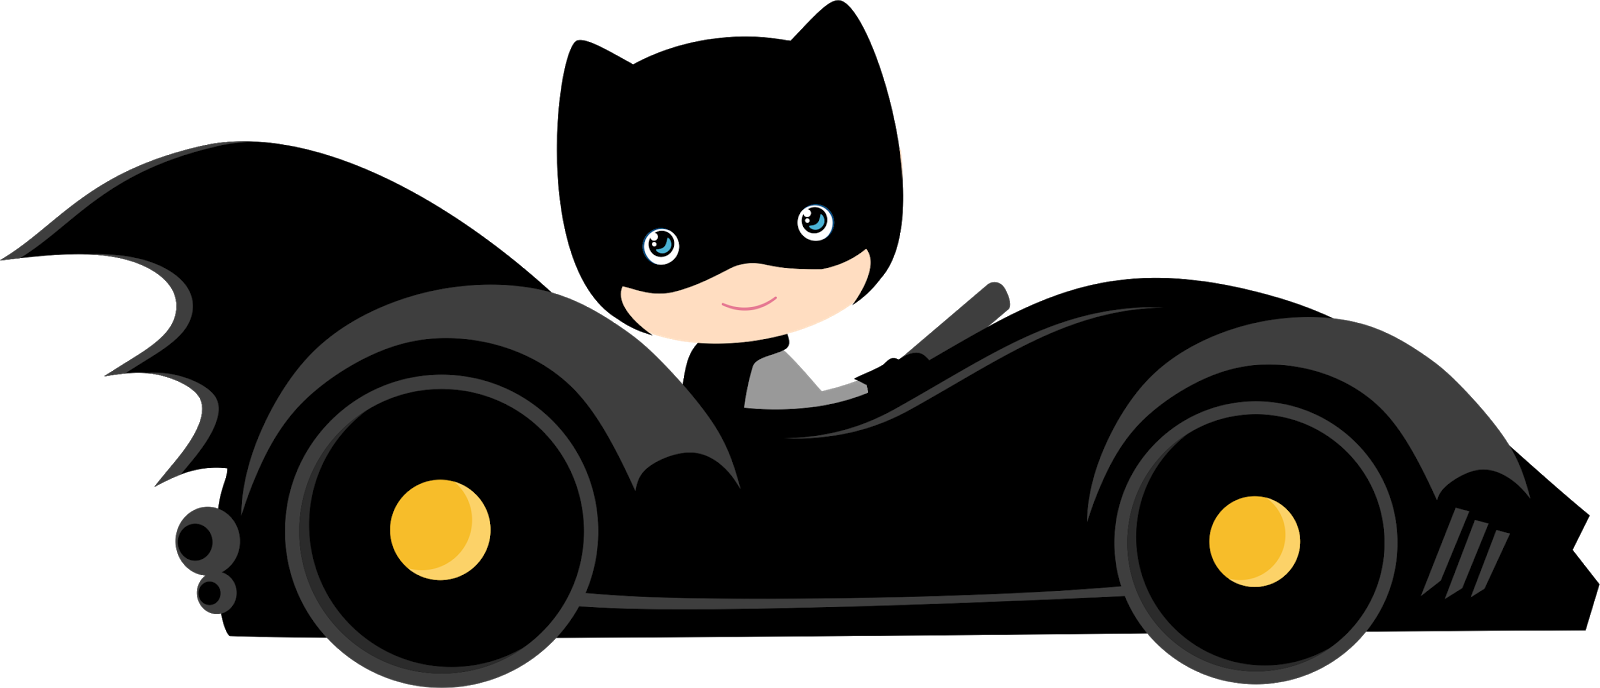 Baby Batman PNG Background Image